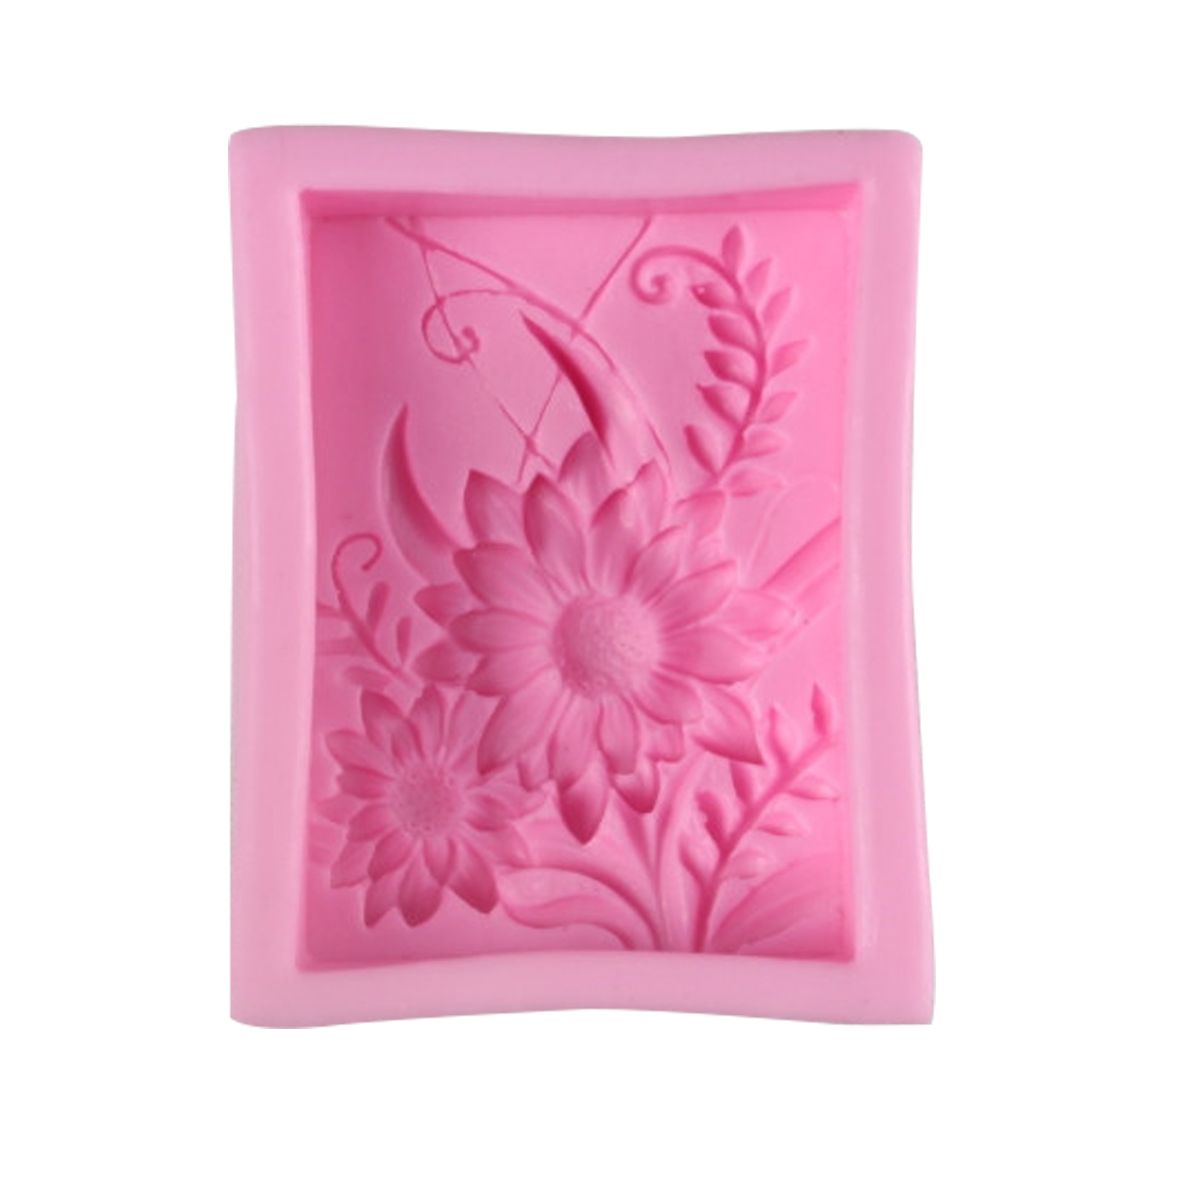 Silicone-3D-Flexible-Sunflower-Candle-Soap-Making-Mould-Cake-Handmade-DIY-Mold-1305121